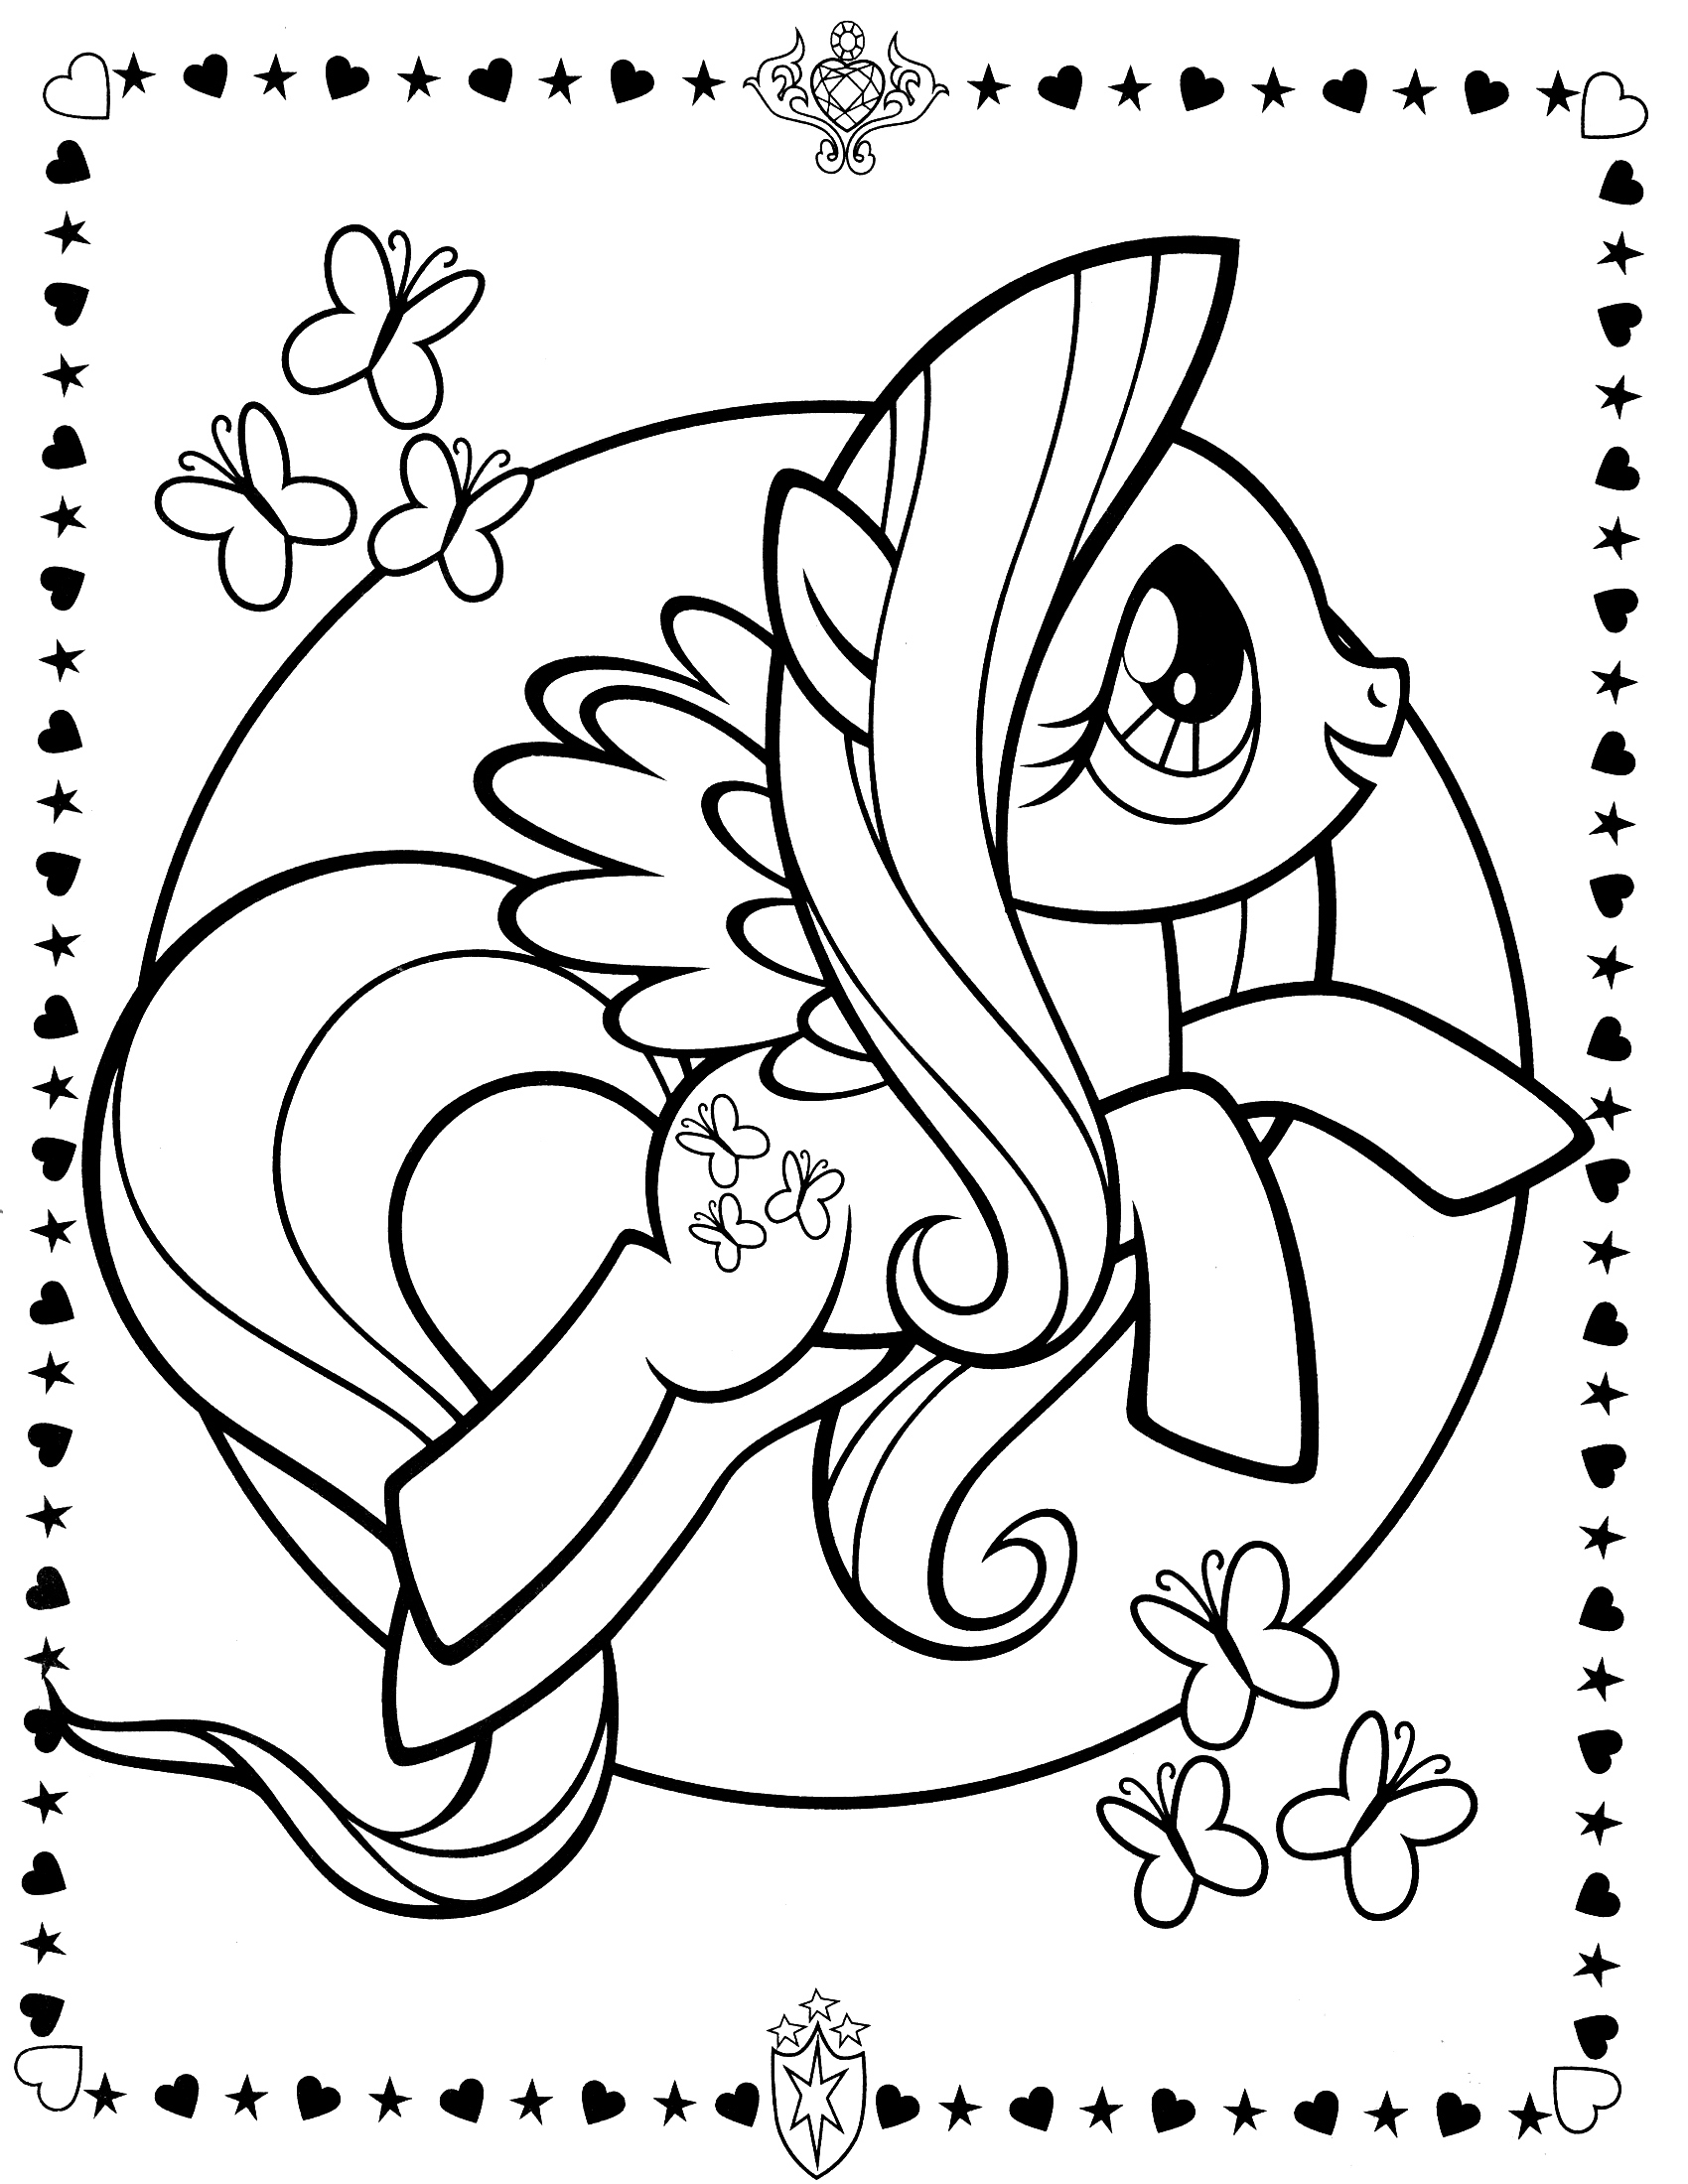 my little pony coloring book pdf free download